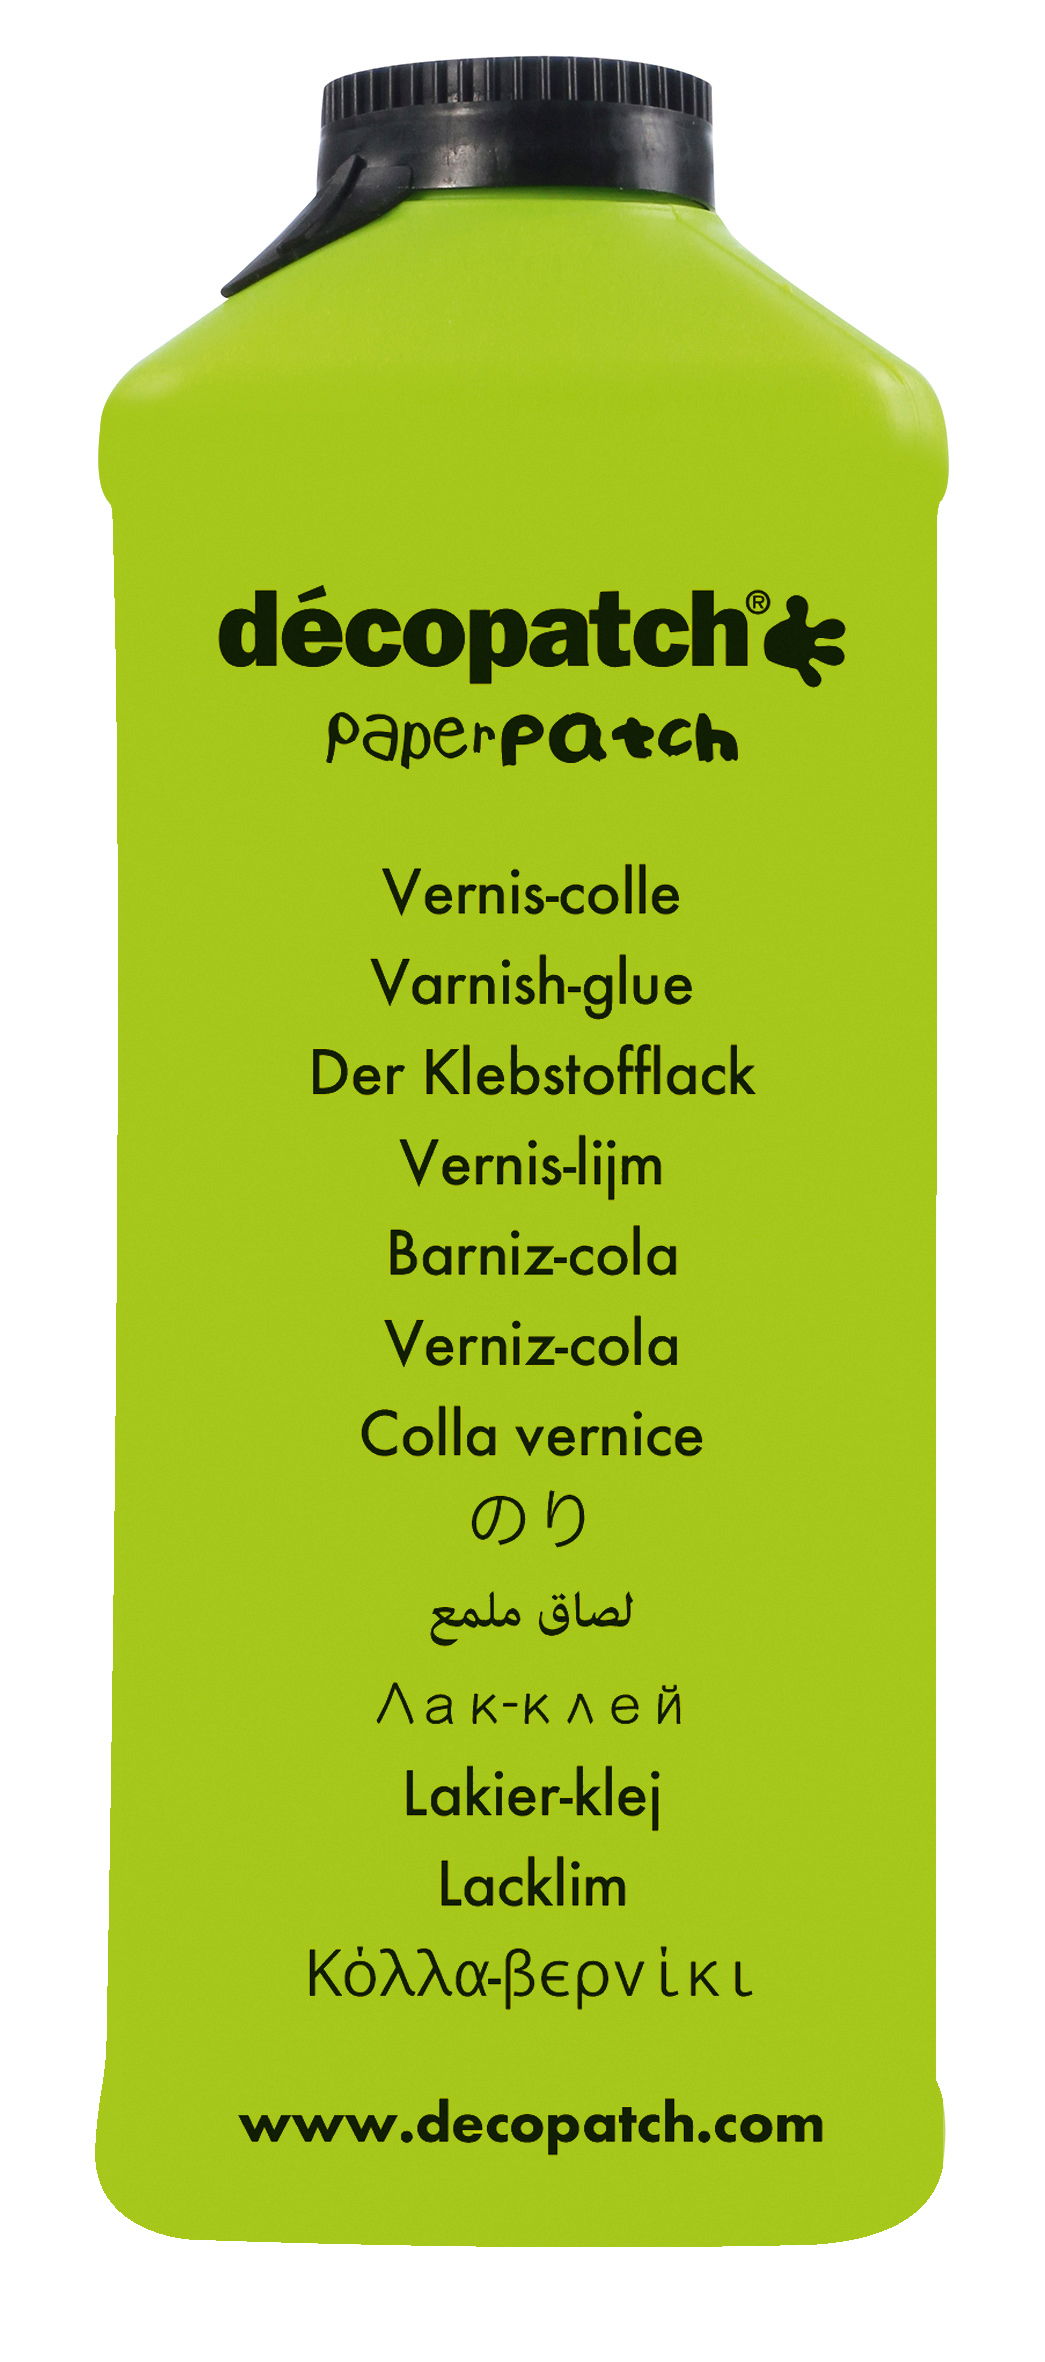 DECOPATCH Paperpatch vernis-colle PP600AO 600ml